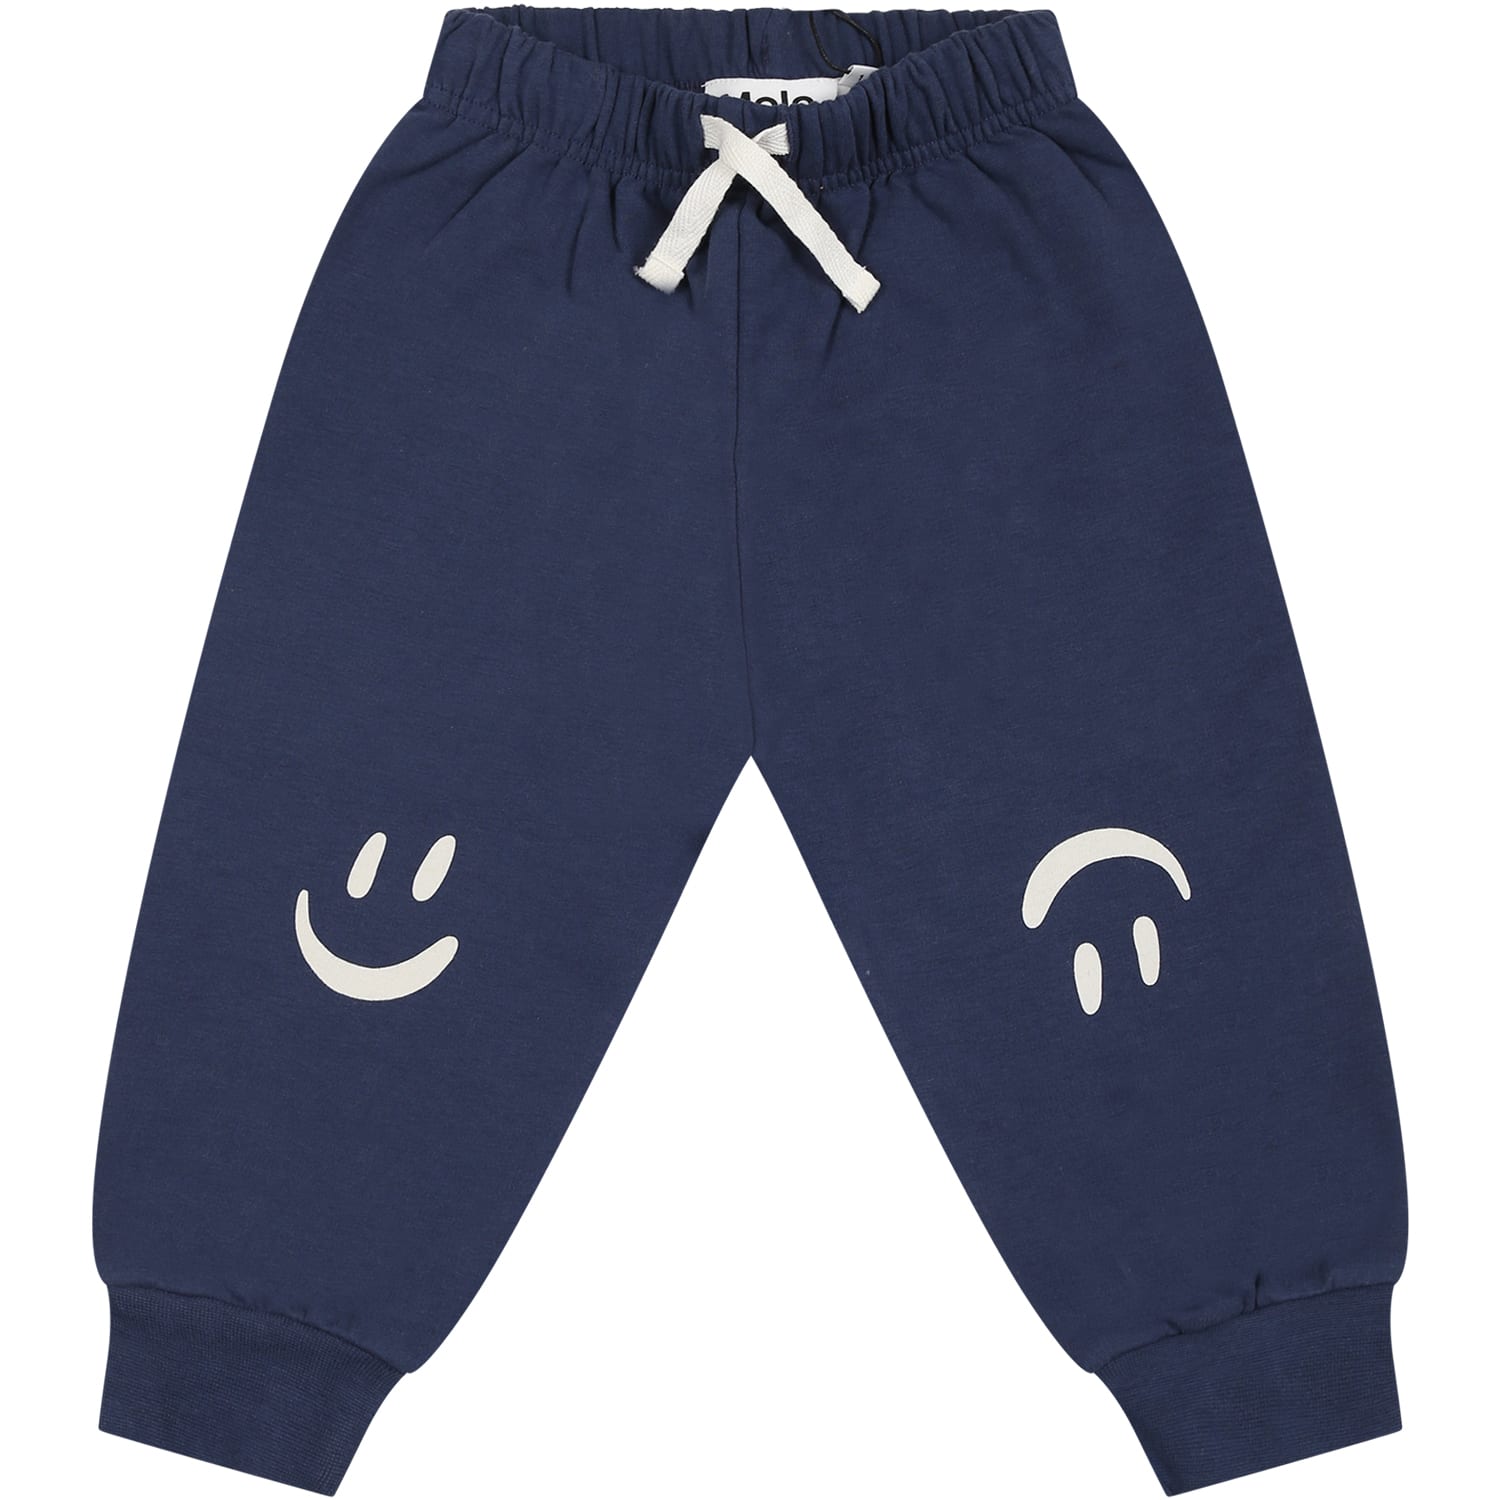 Boys Pants: Trousers, Cargo and Shorts for Boys 4-16 years